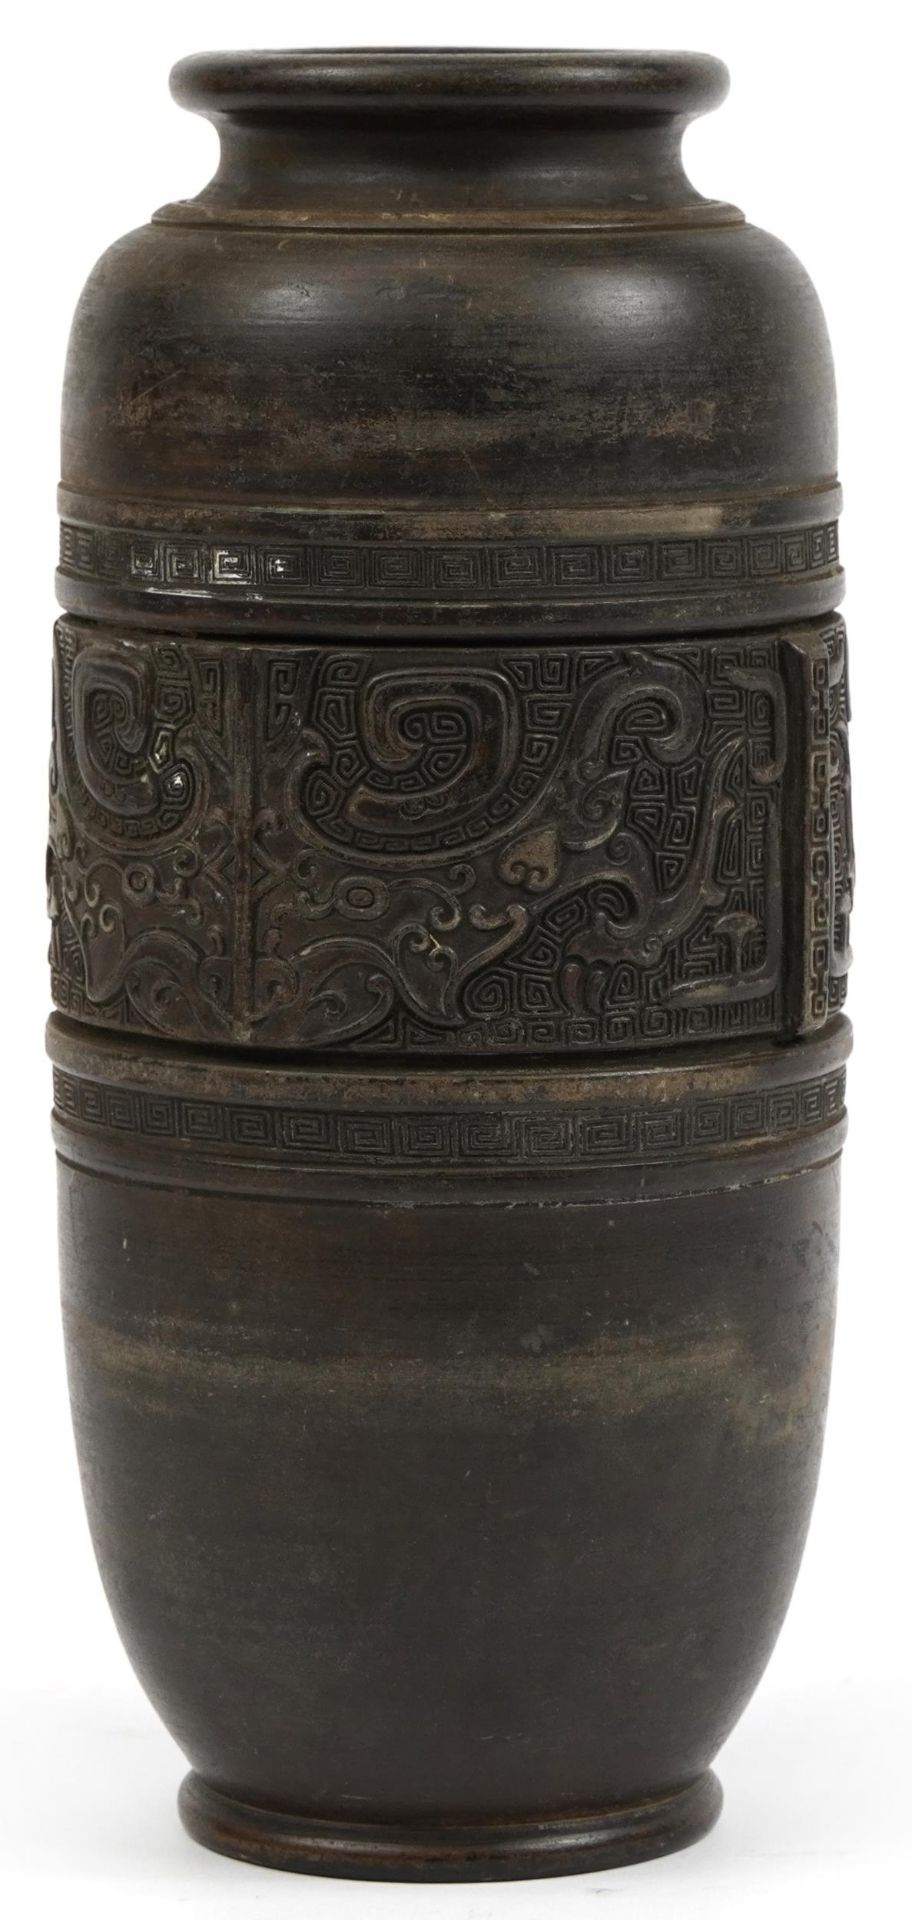 Japanese archaic style vase decorated with emblems, 31.5cm high For further information on this